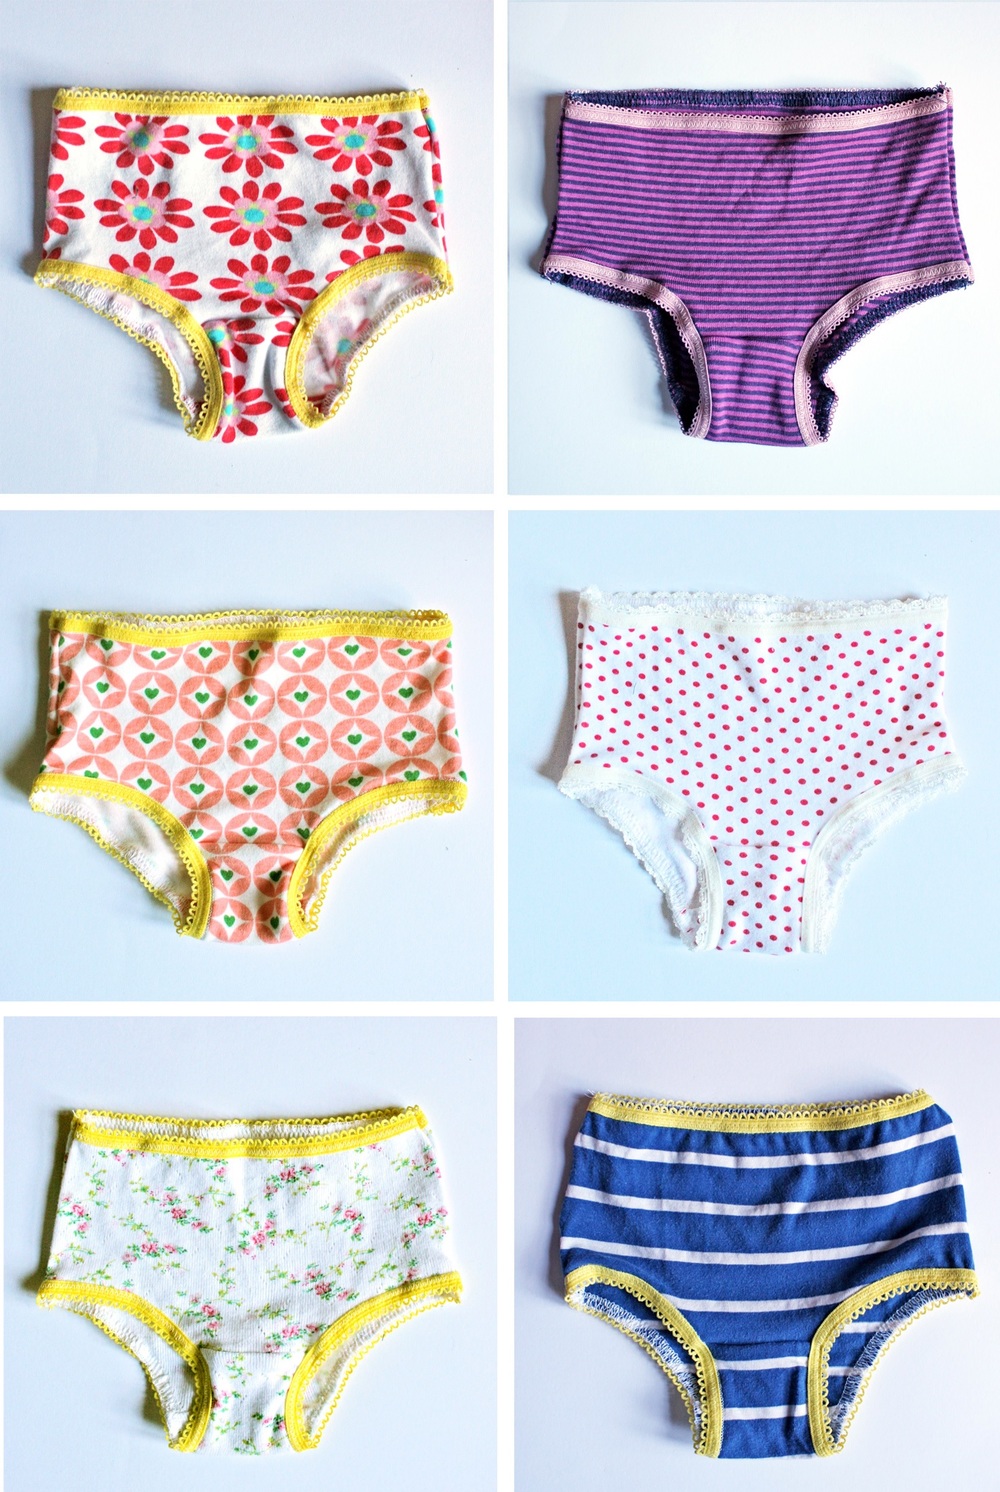 Underwear Sewing Patterns for Women, Boys, and Girls